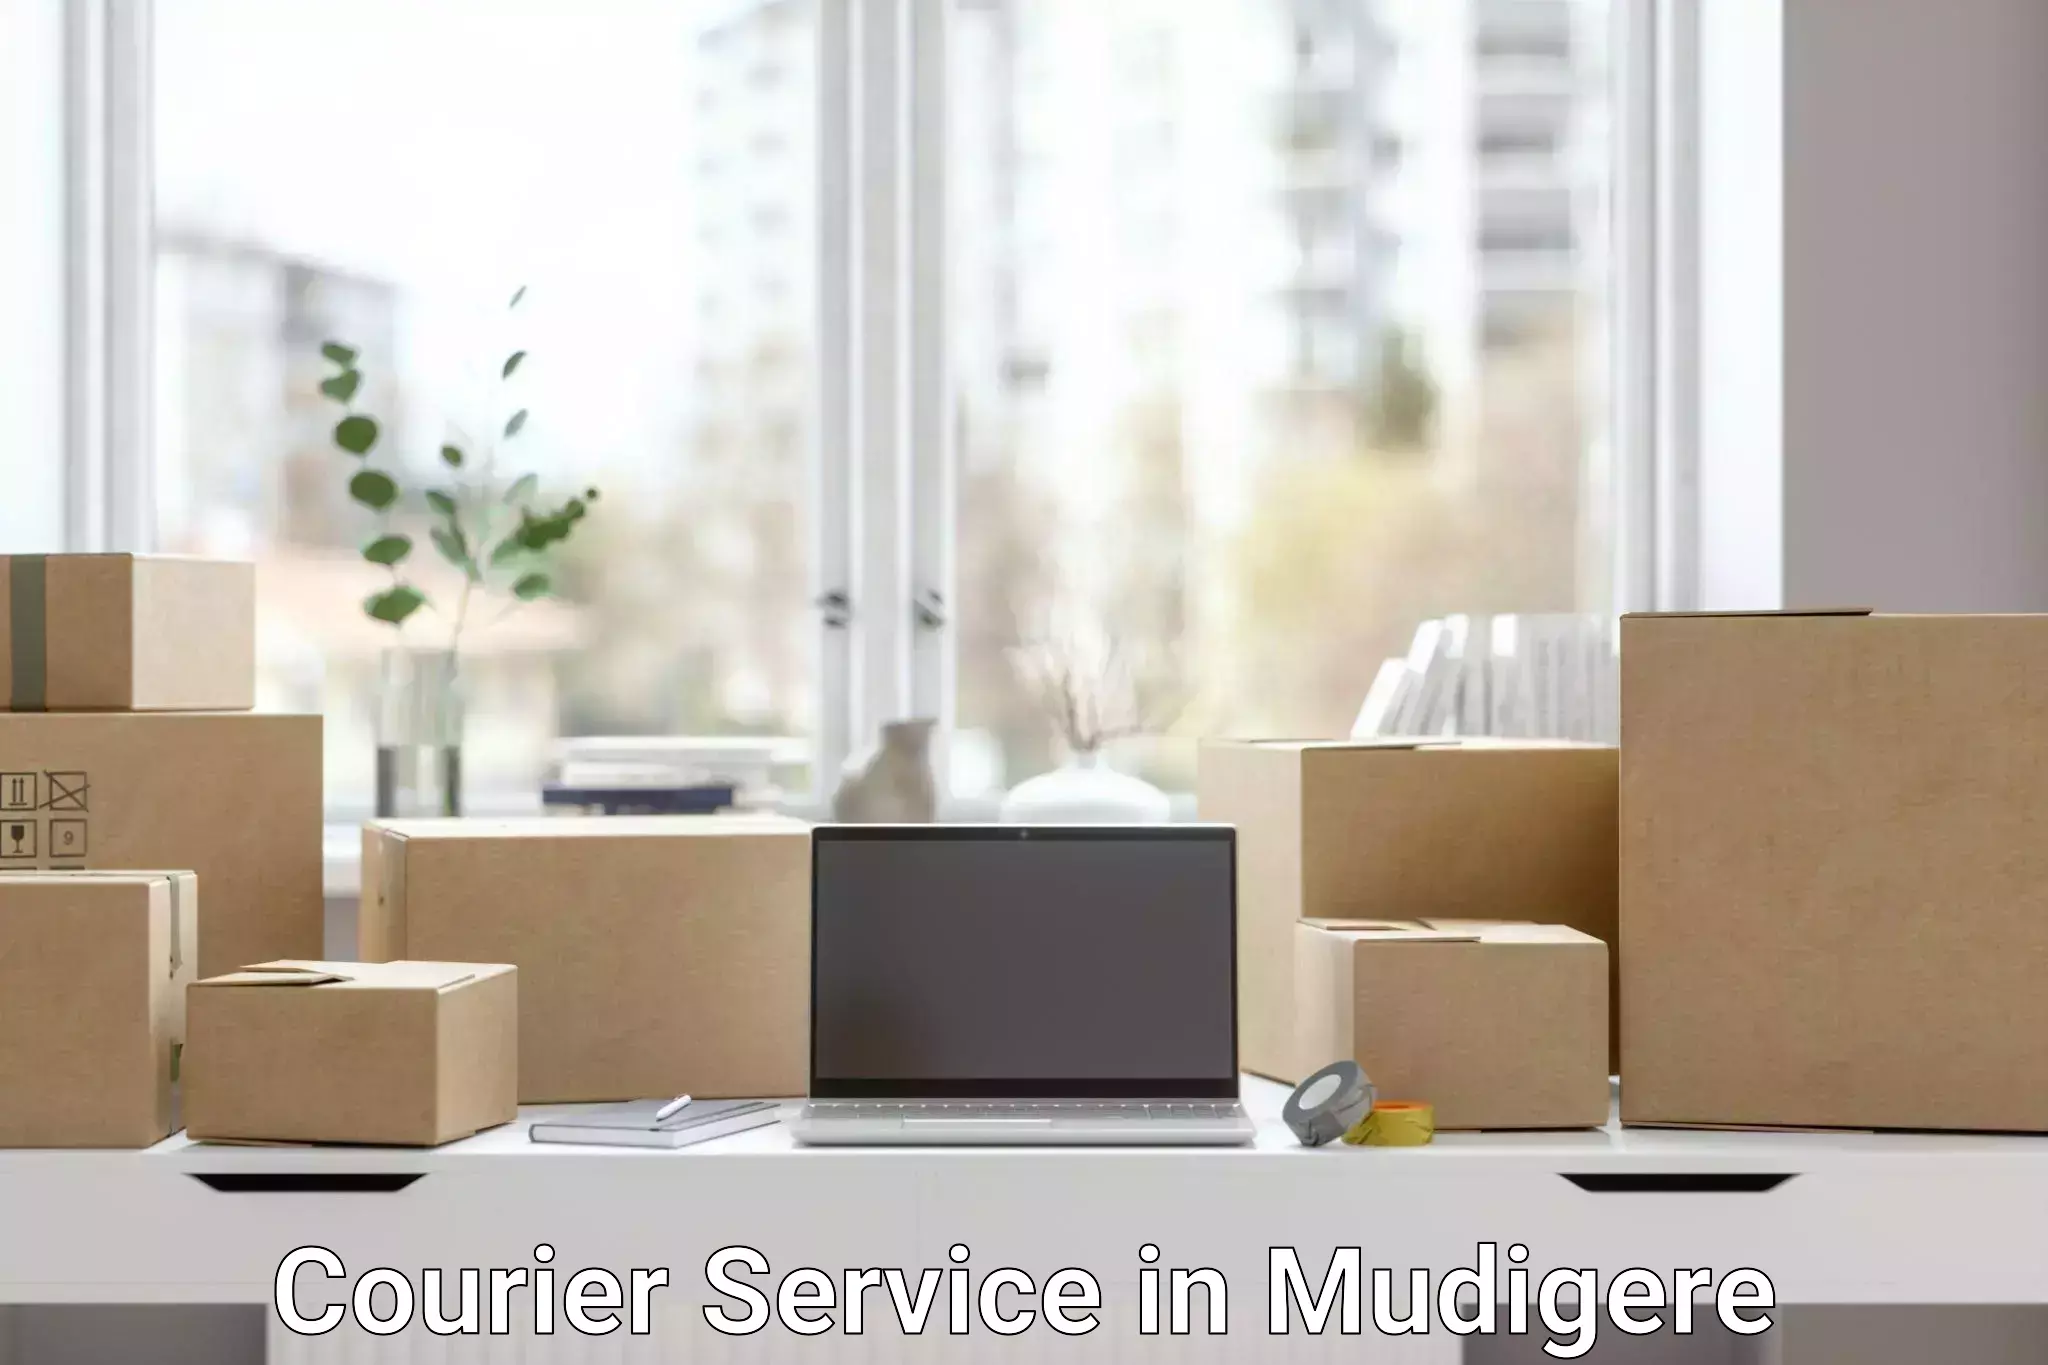 Courier service booking in Mudigere